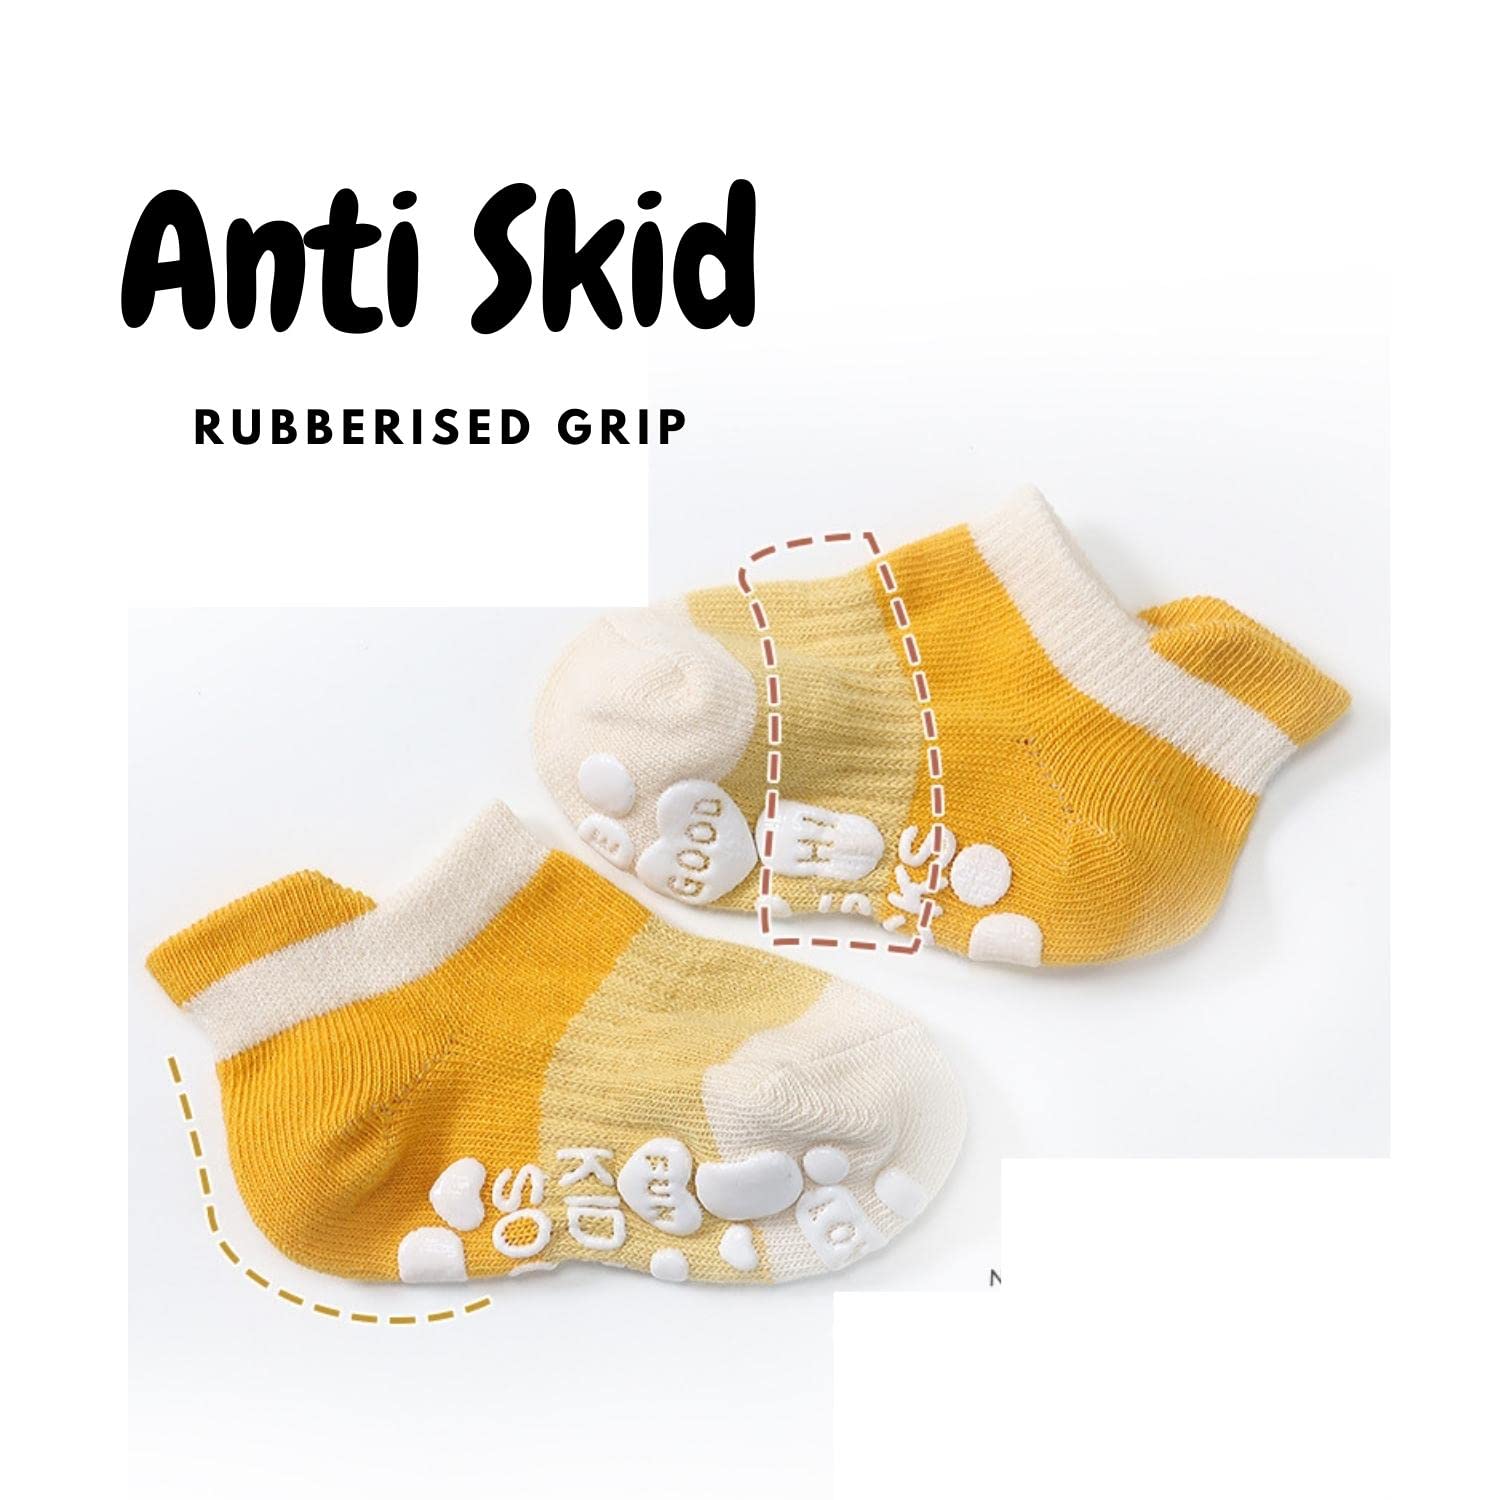 TENDSY Baby Anti Slip Crew Socks With Grips For Toddlers, Little